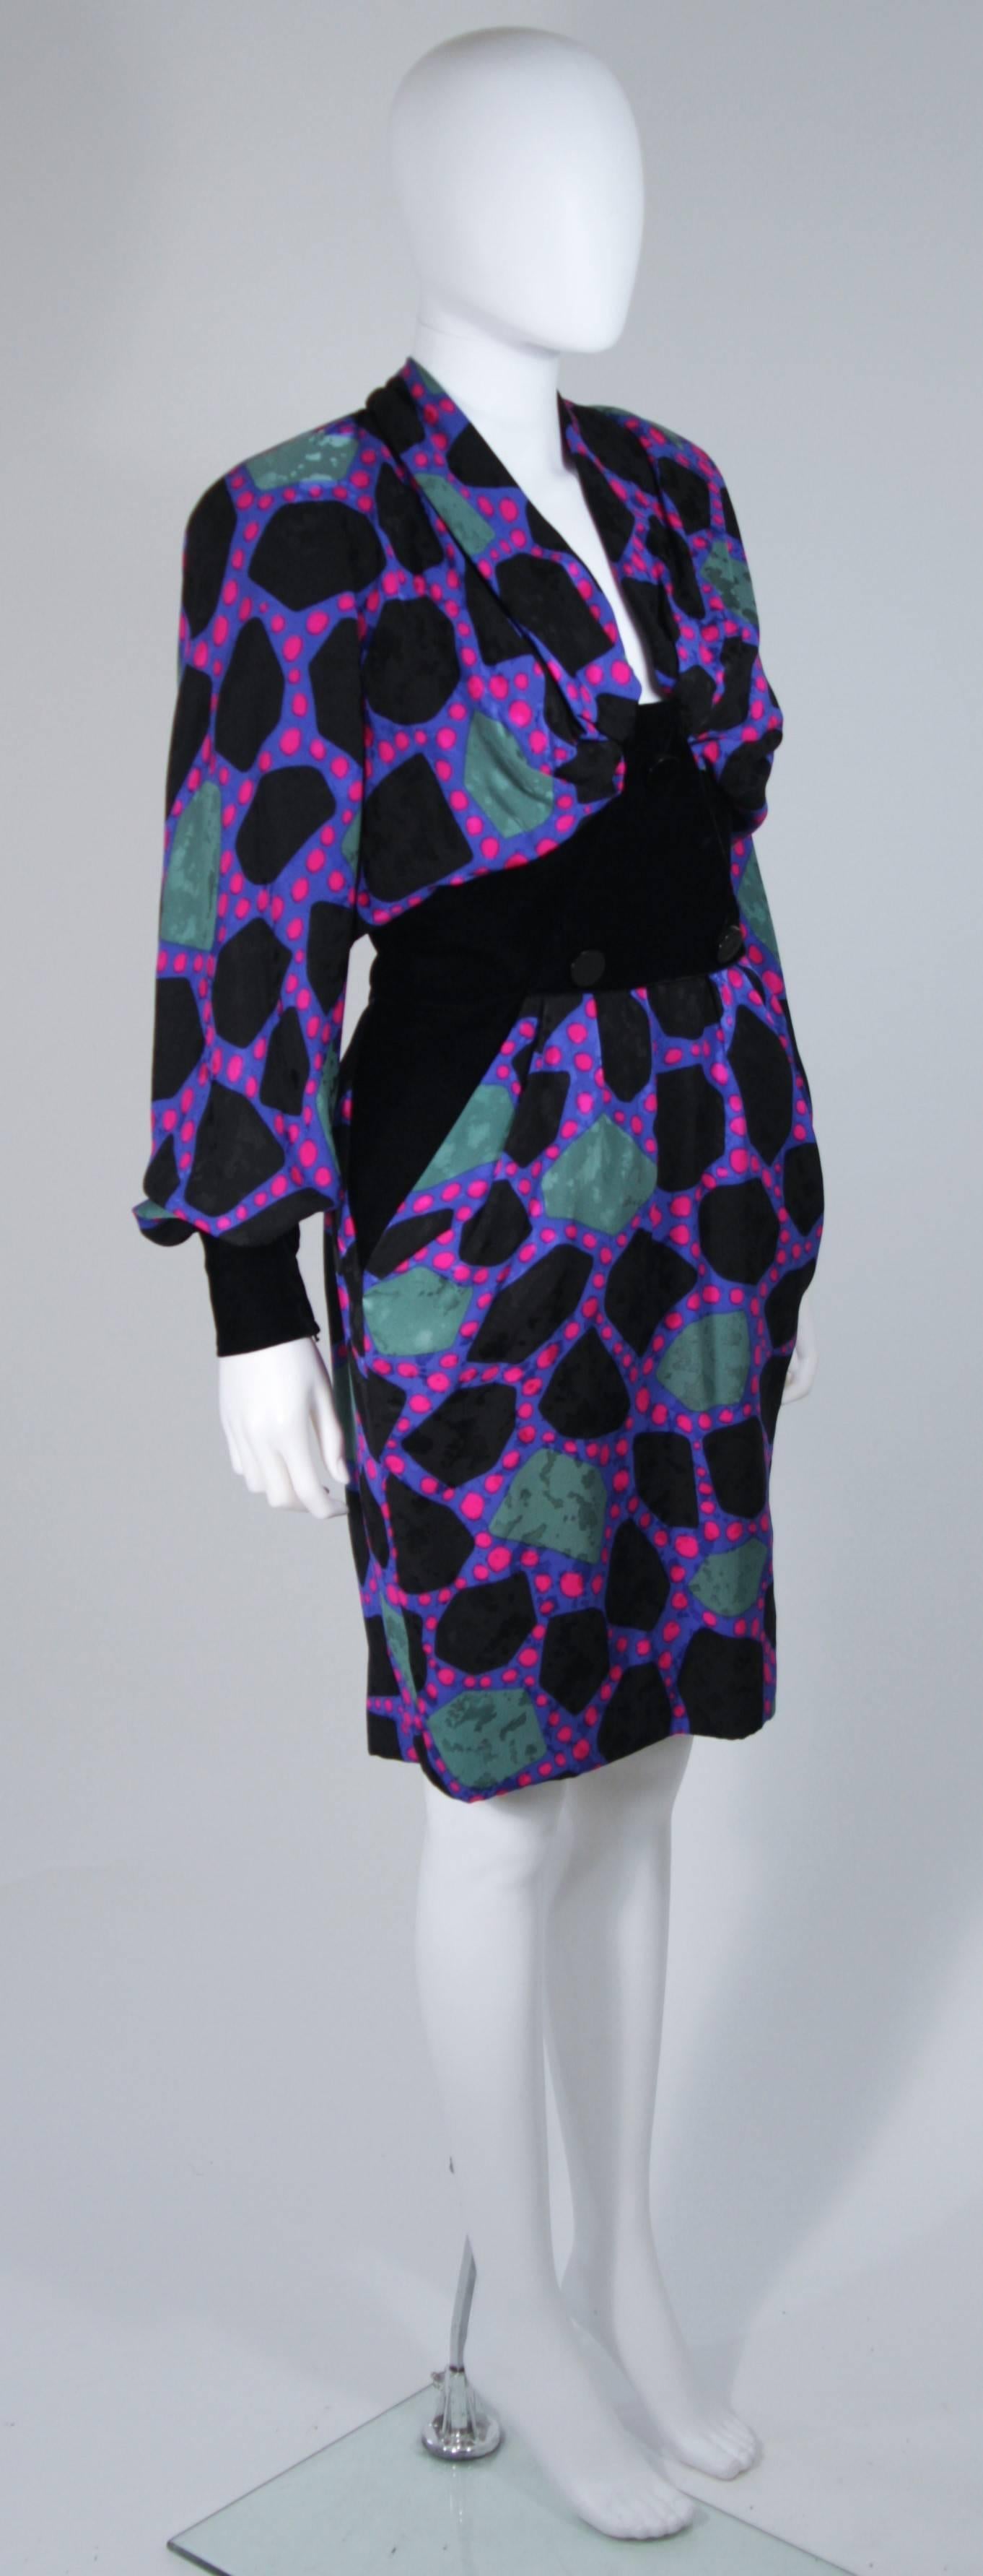 JACQUELINE DE RIBES Circa 1990s Abstract Silk Printed Dress with Velvet Size 6-8 In Excellent Condition For Sale In Los Angeles, CA